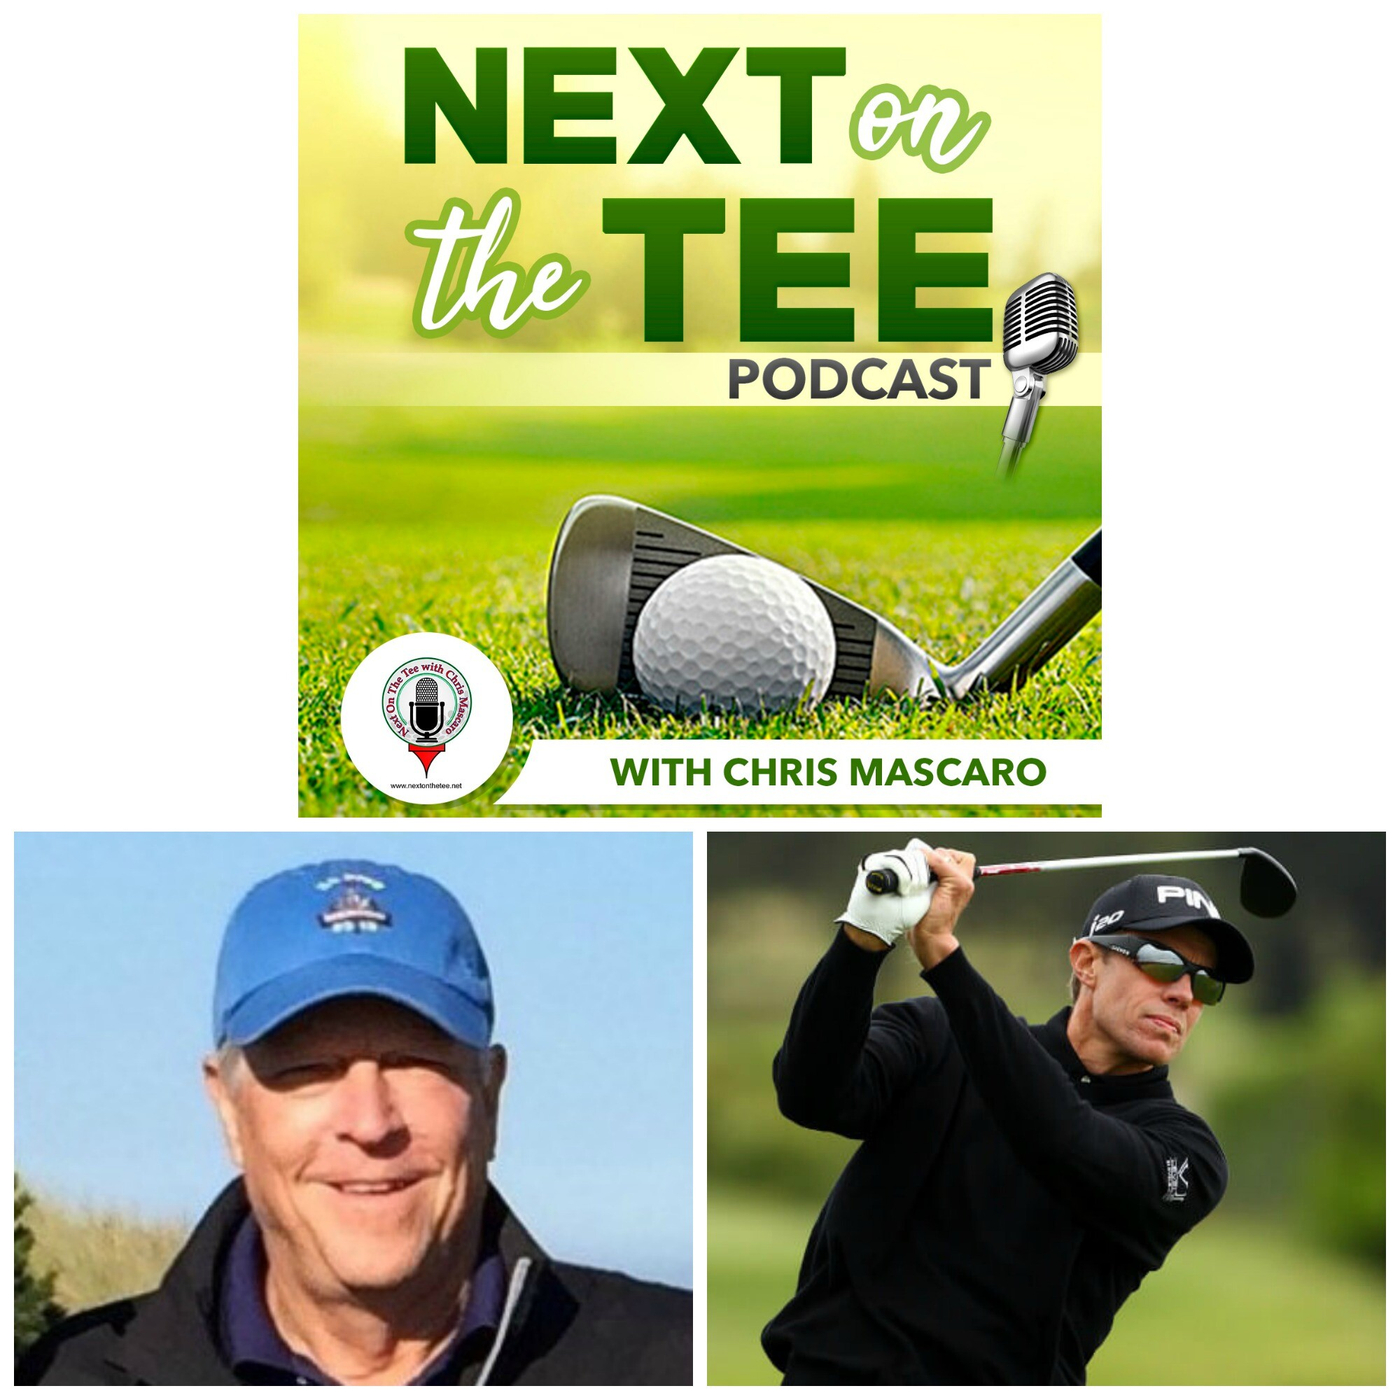 Keith Hirshland, Author & former Golf Channel Producer, and PGA Tour ...